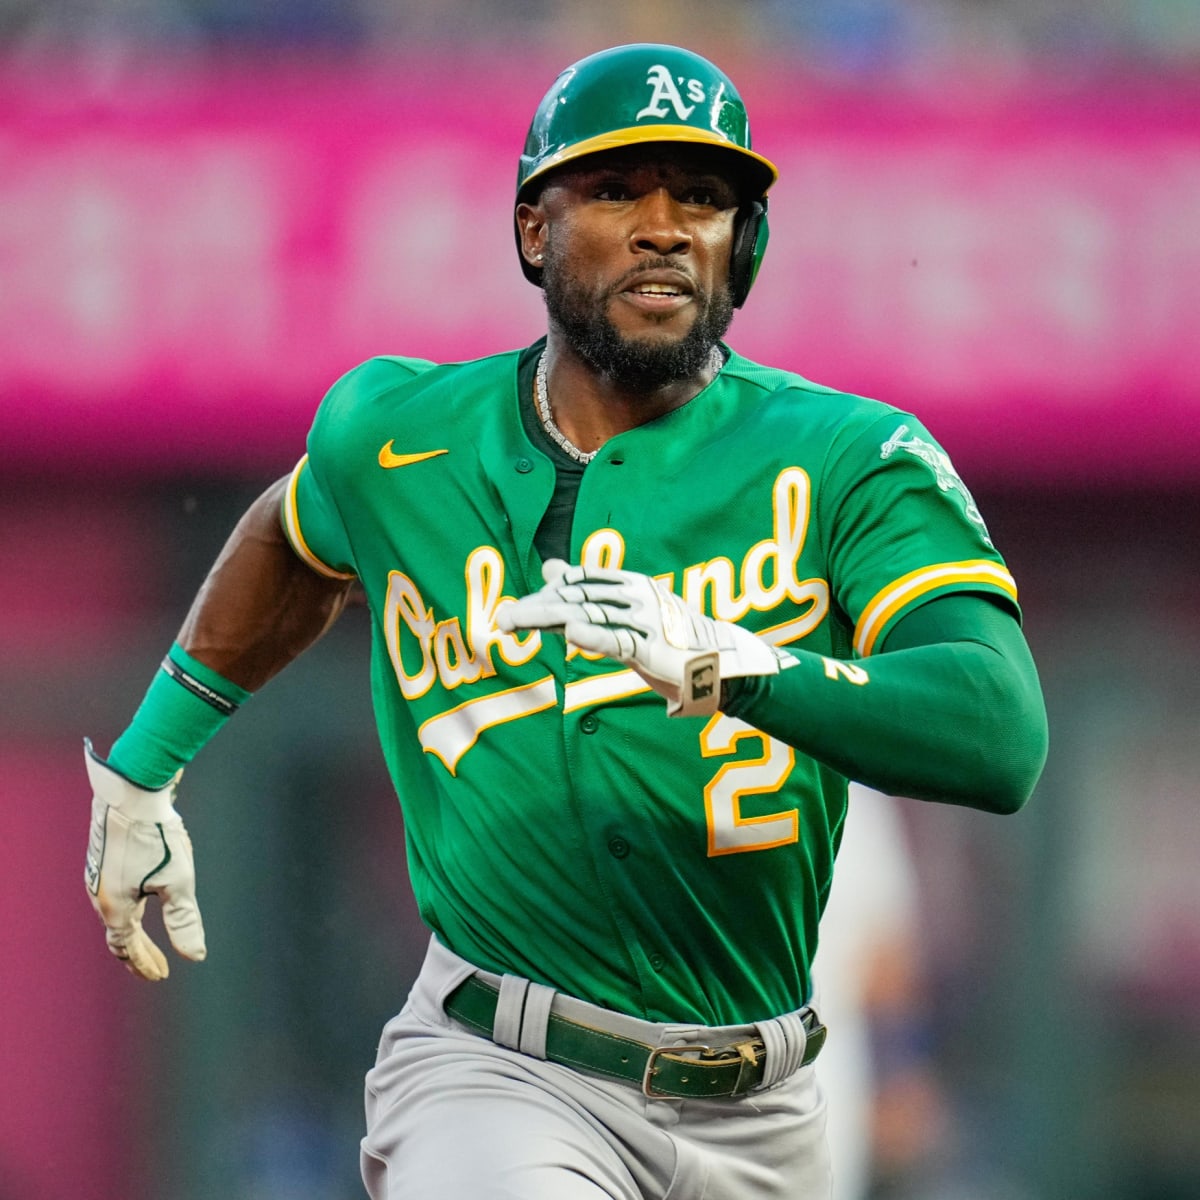 Will Starling Marte's addition be enough to get Athletics into